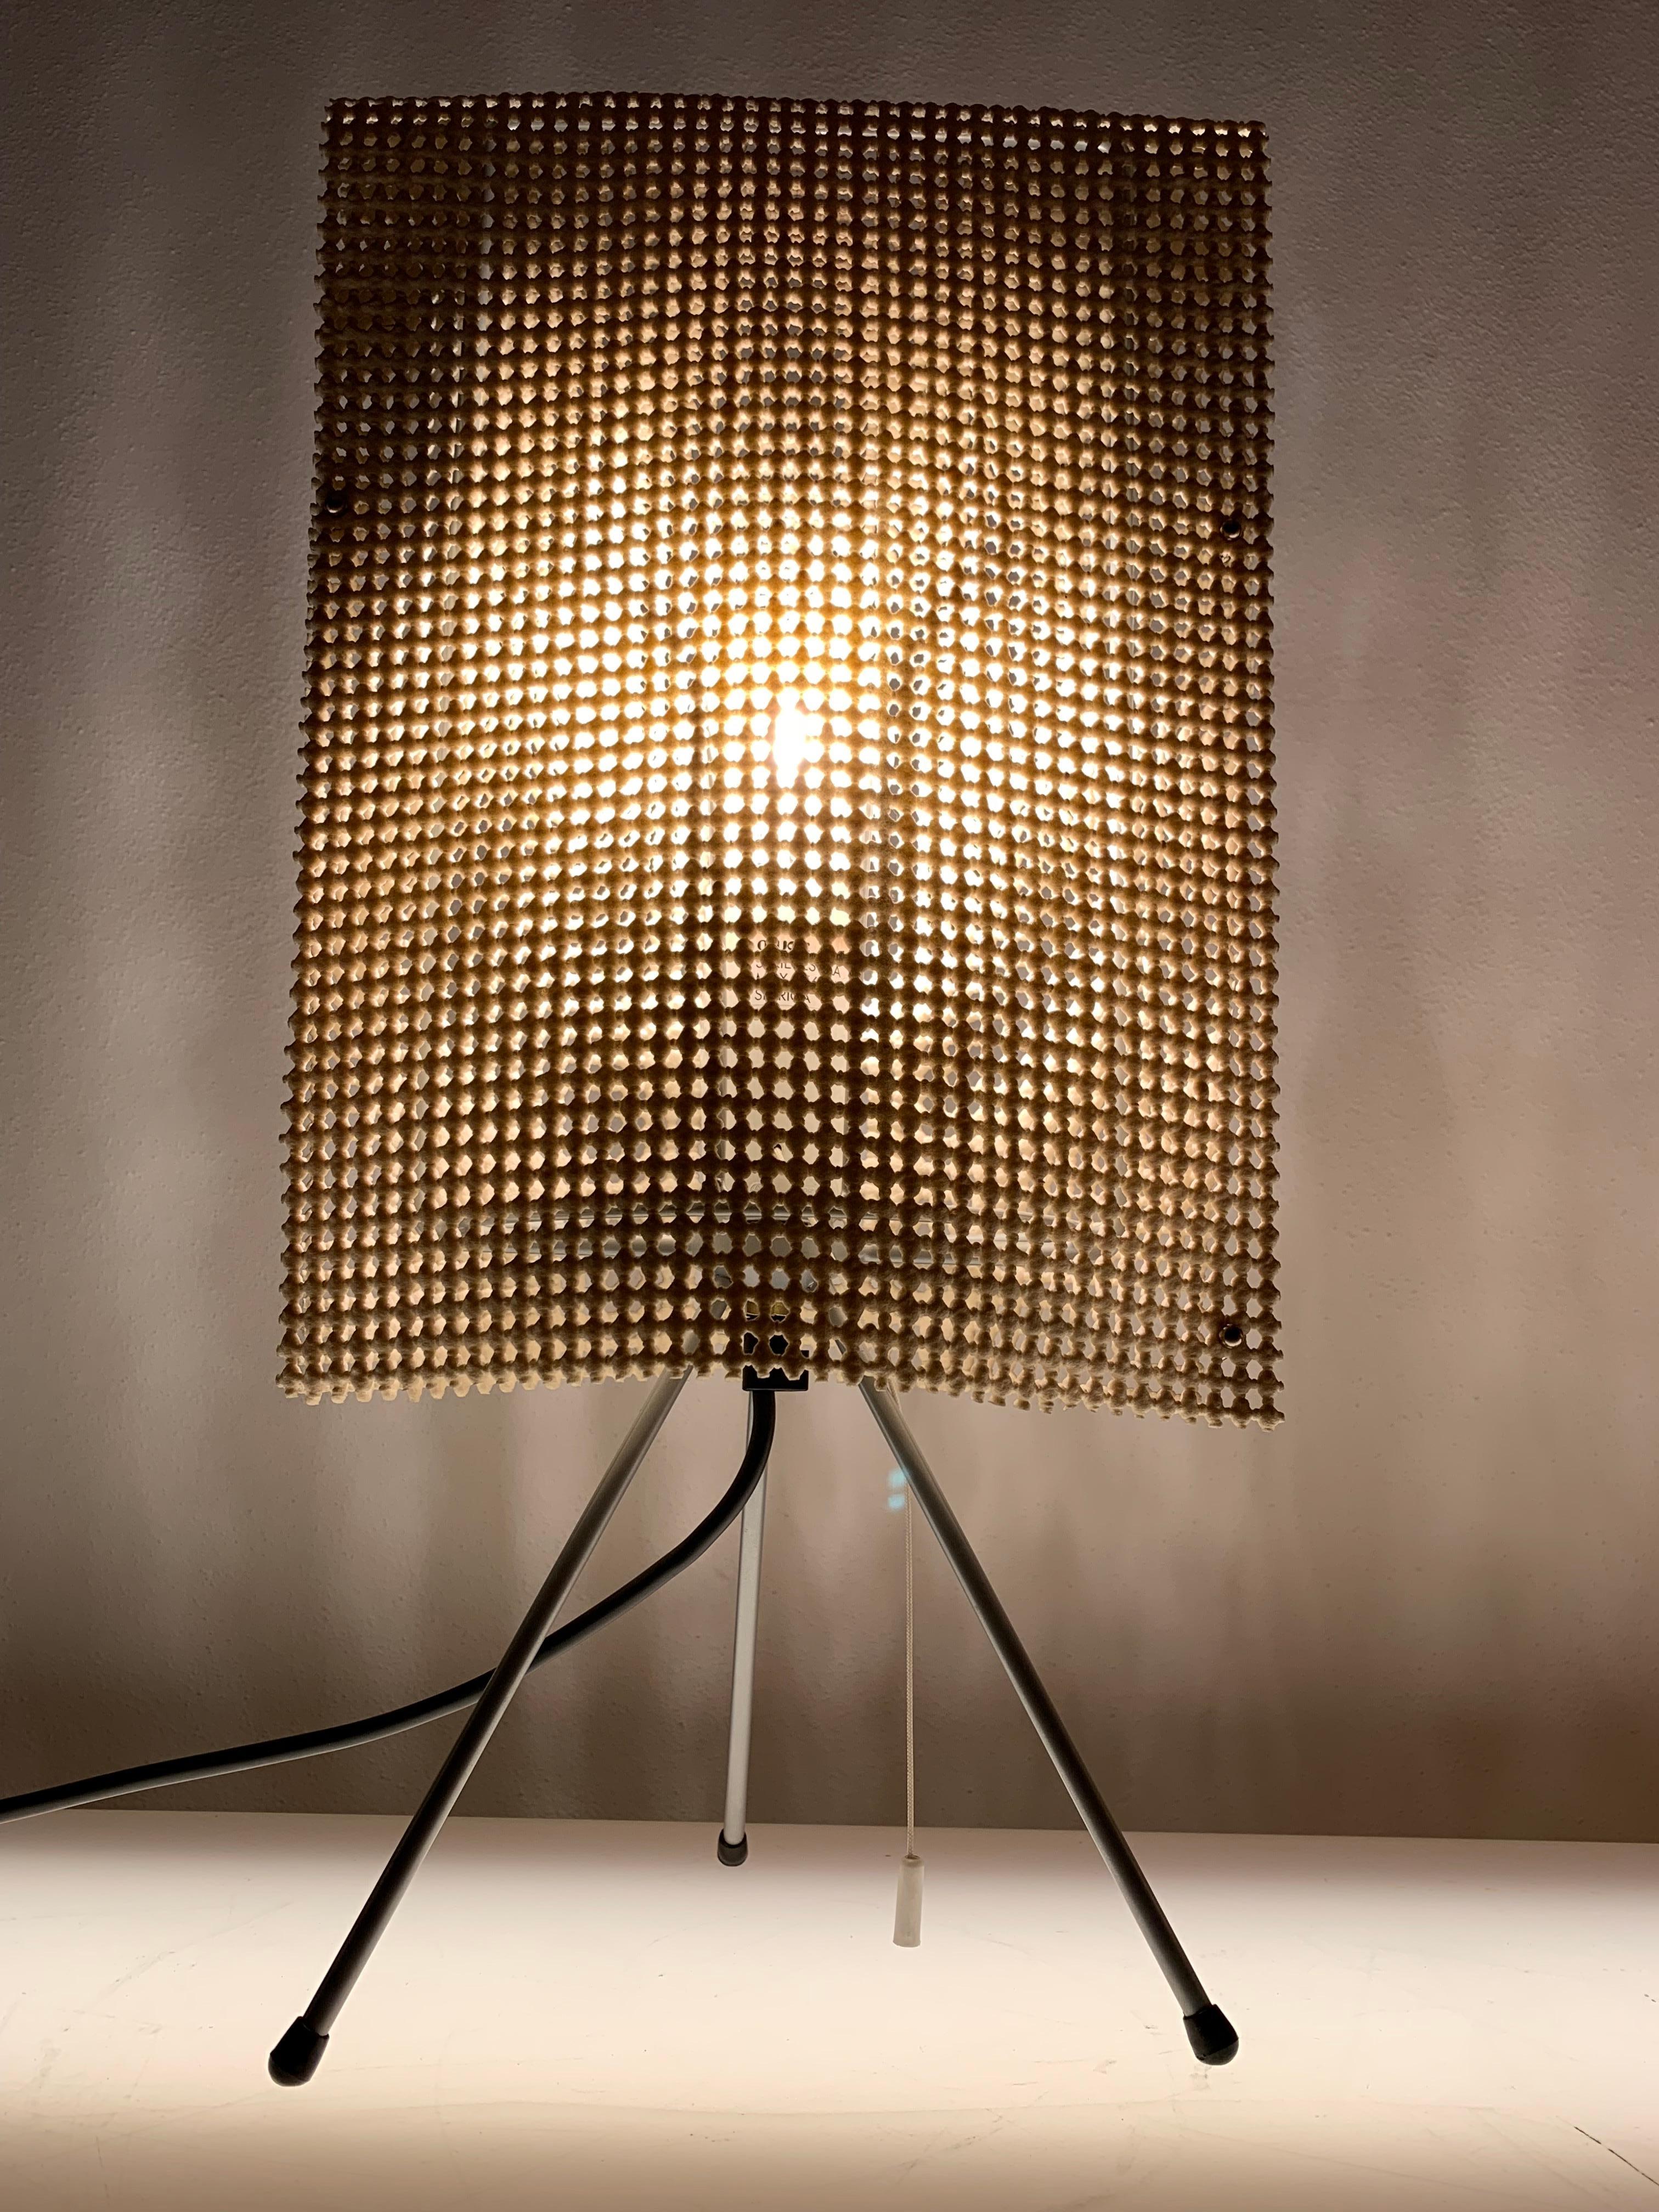 Late 20th Century Table Lamp Estela Model by Campana Brothers for Oluce Milano